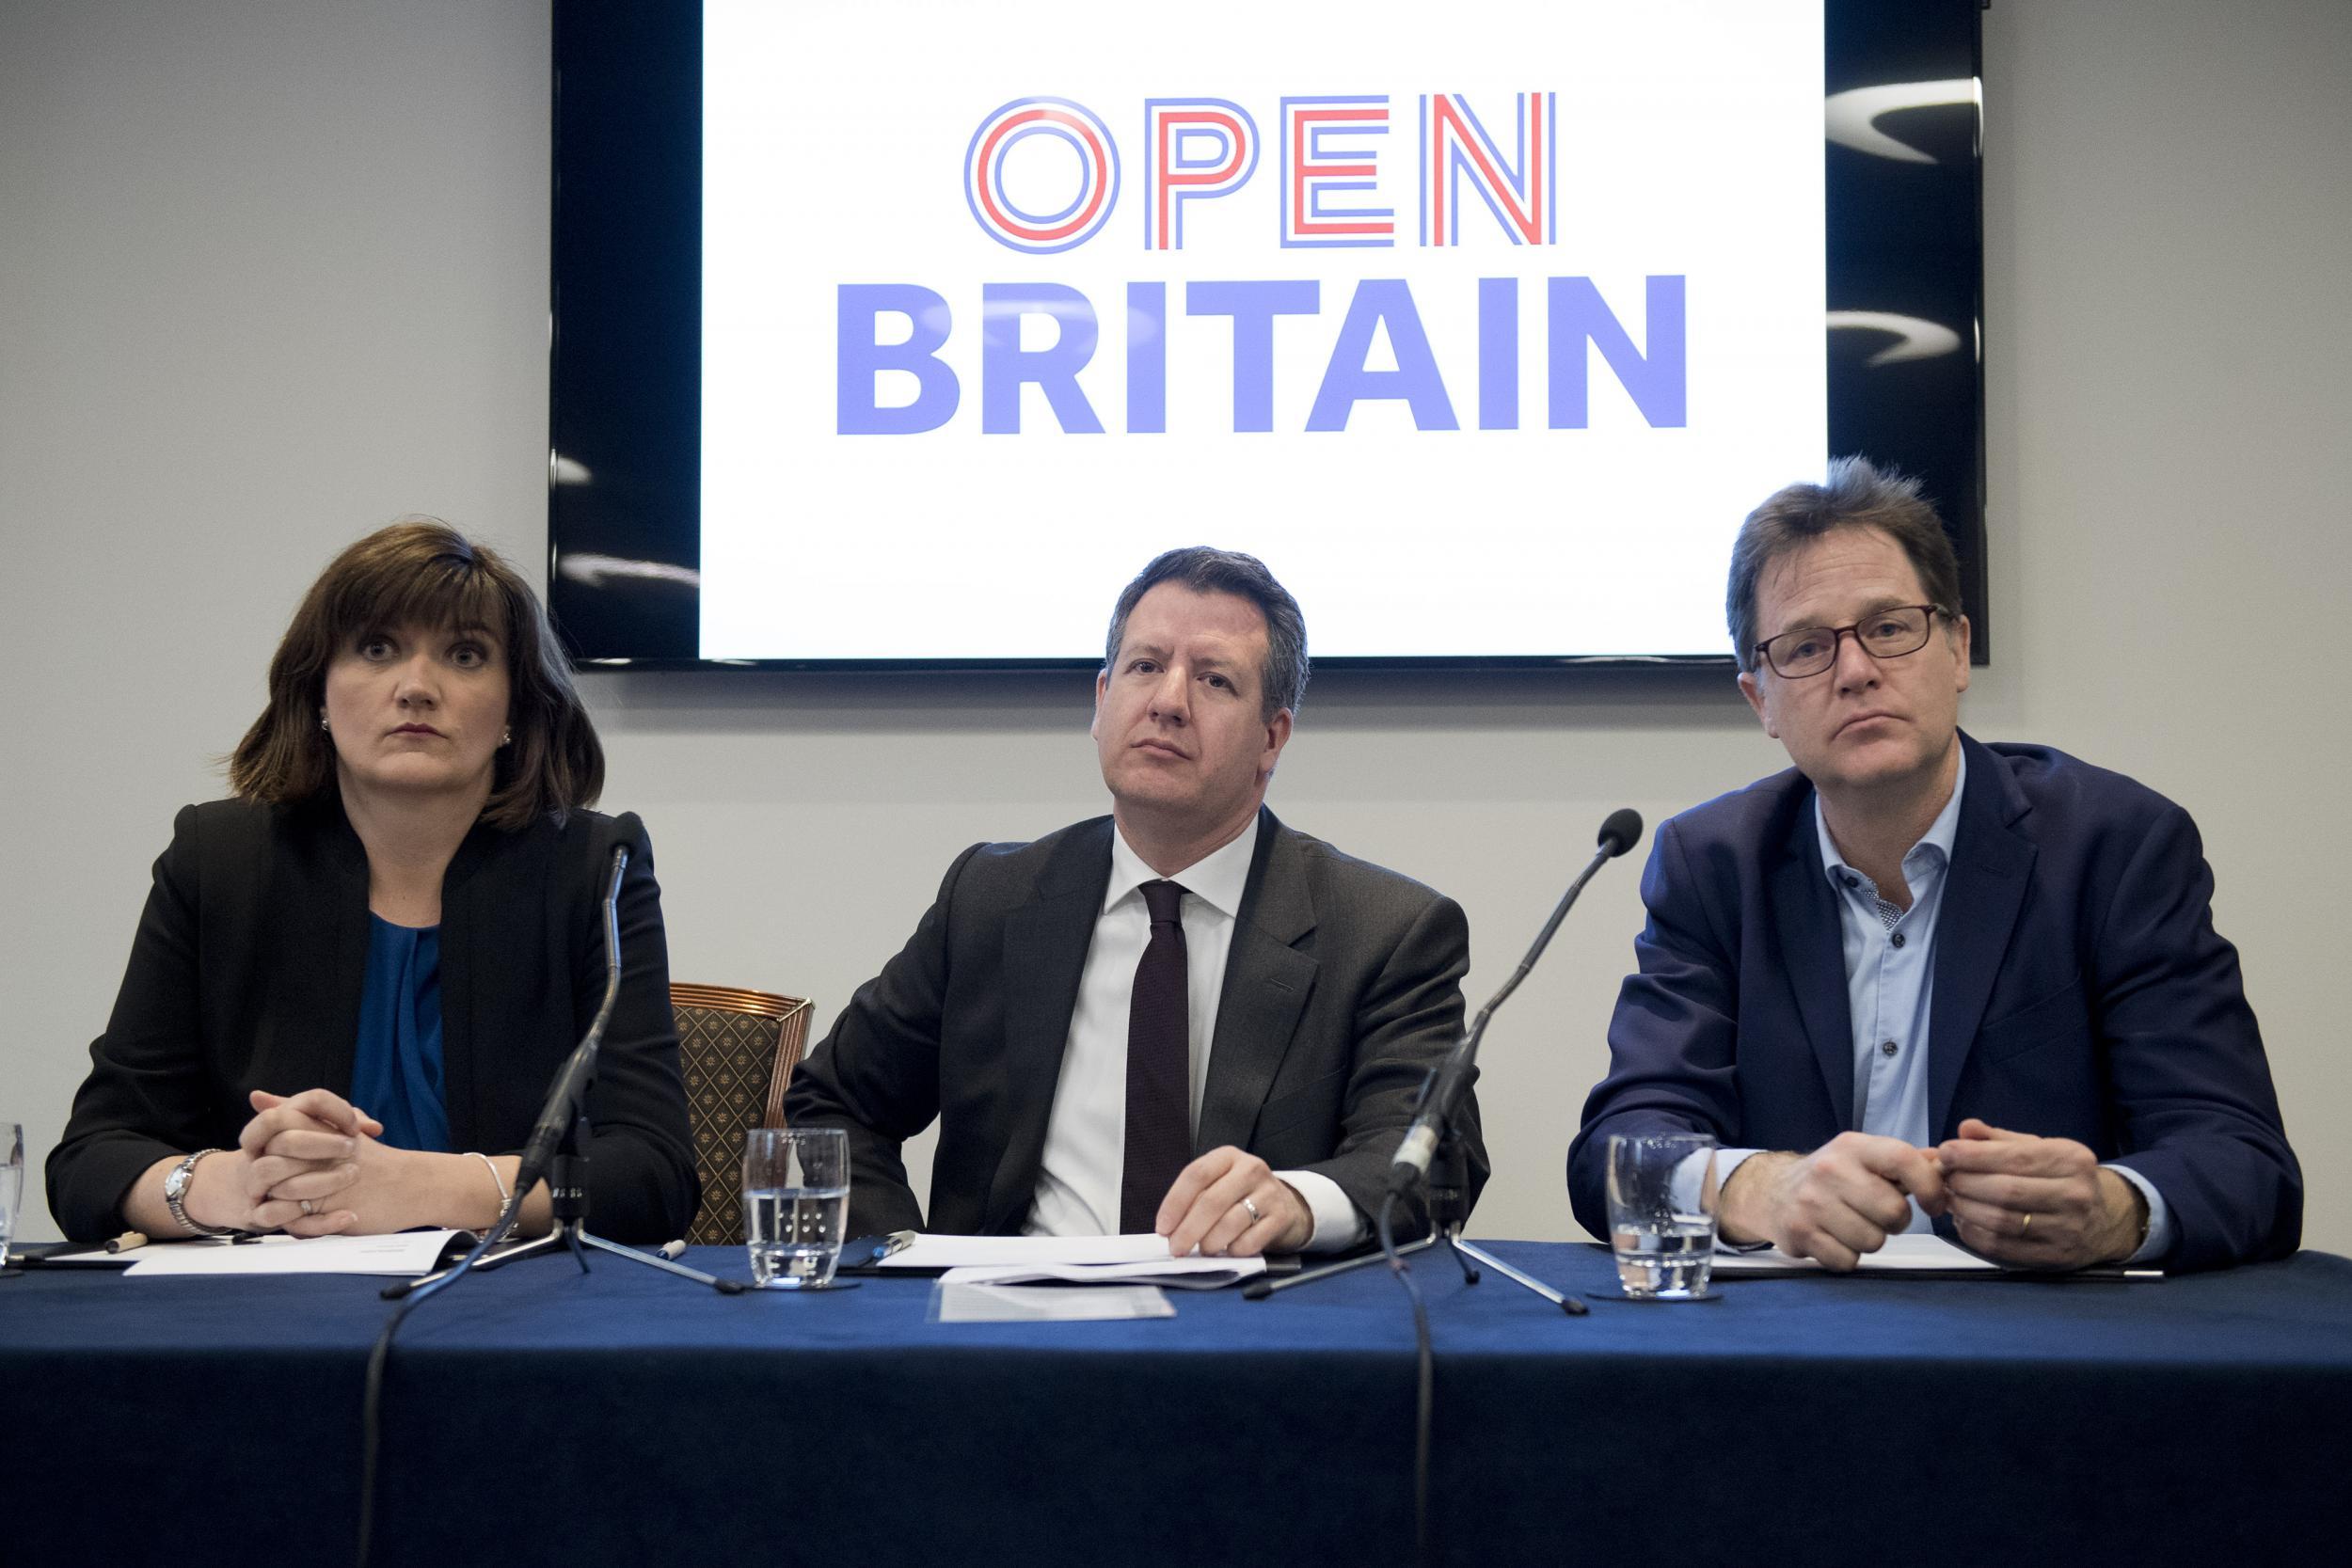 Tory MP Nicky Morgan with Labour MP Chris Leslie and former Lib Dem leader Nick Clegg at the Open Britain event